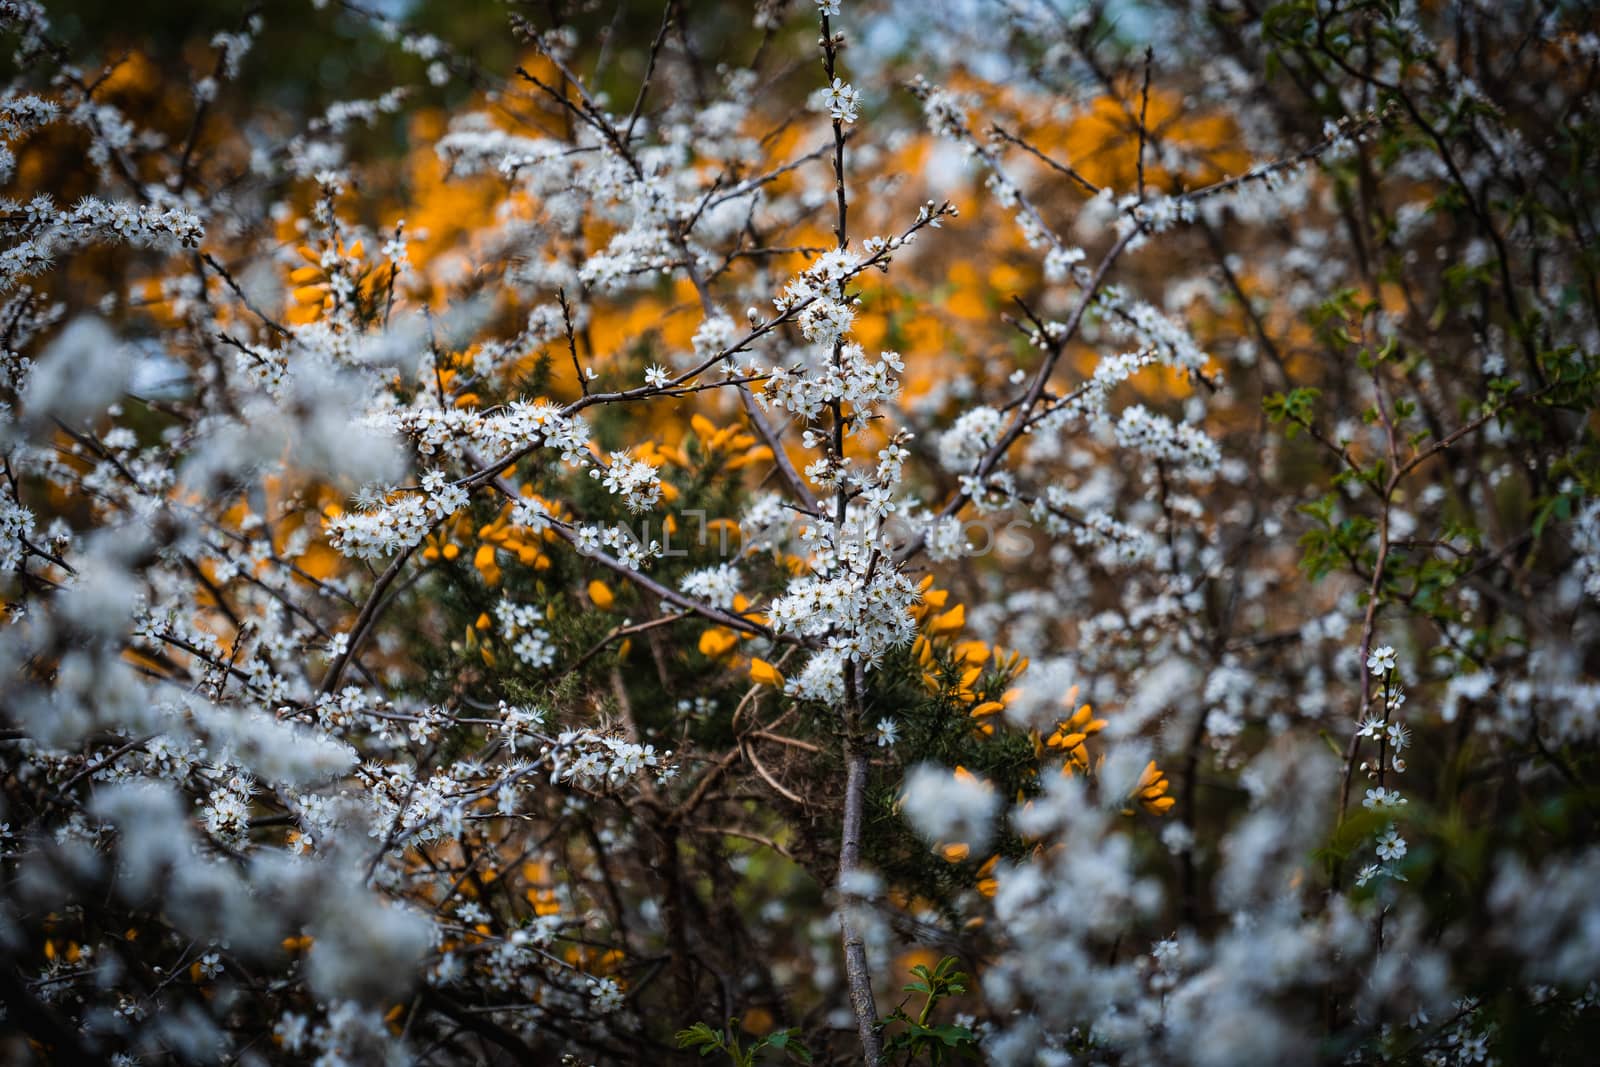 A cluster of white and yellow small flowers in a bush